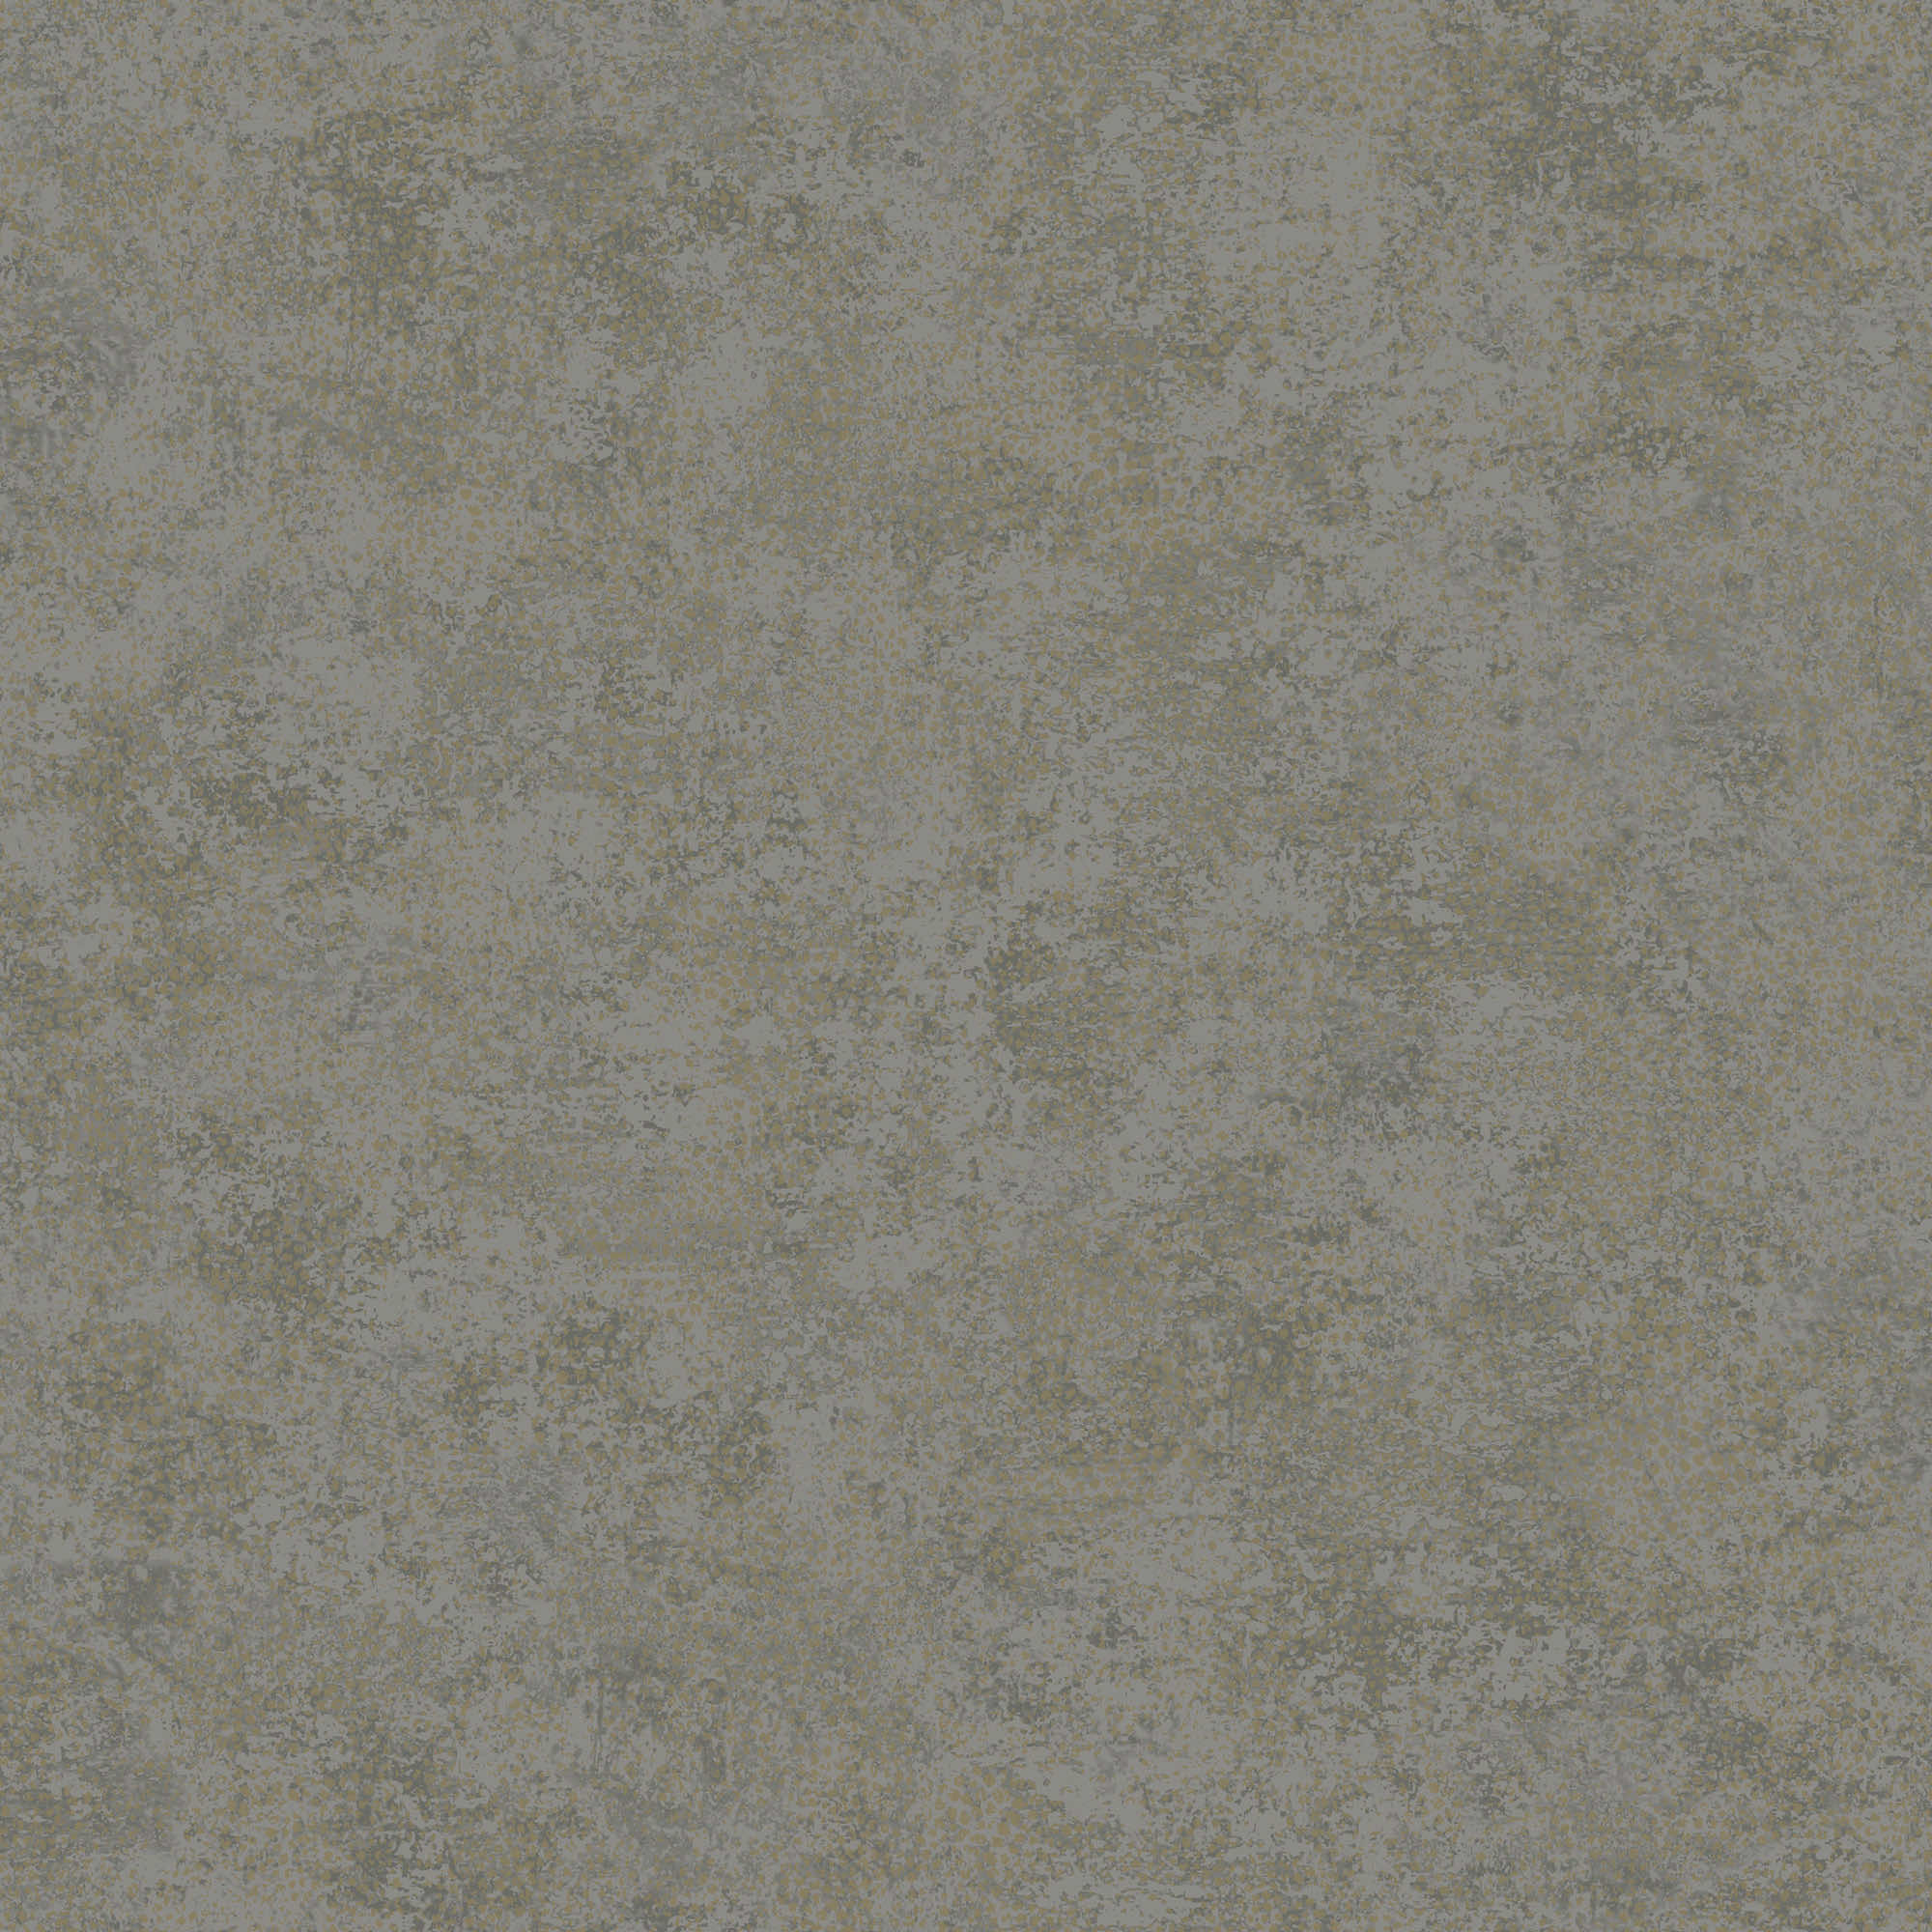 Image of Holden Decor Patina Charcoal Wallpaper - 10.05m x 53cm